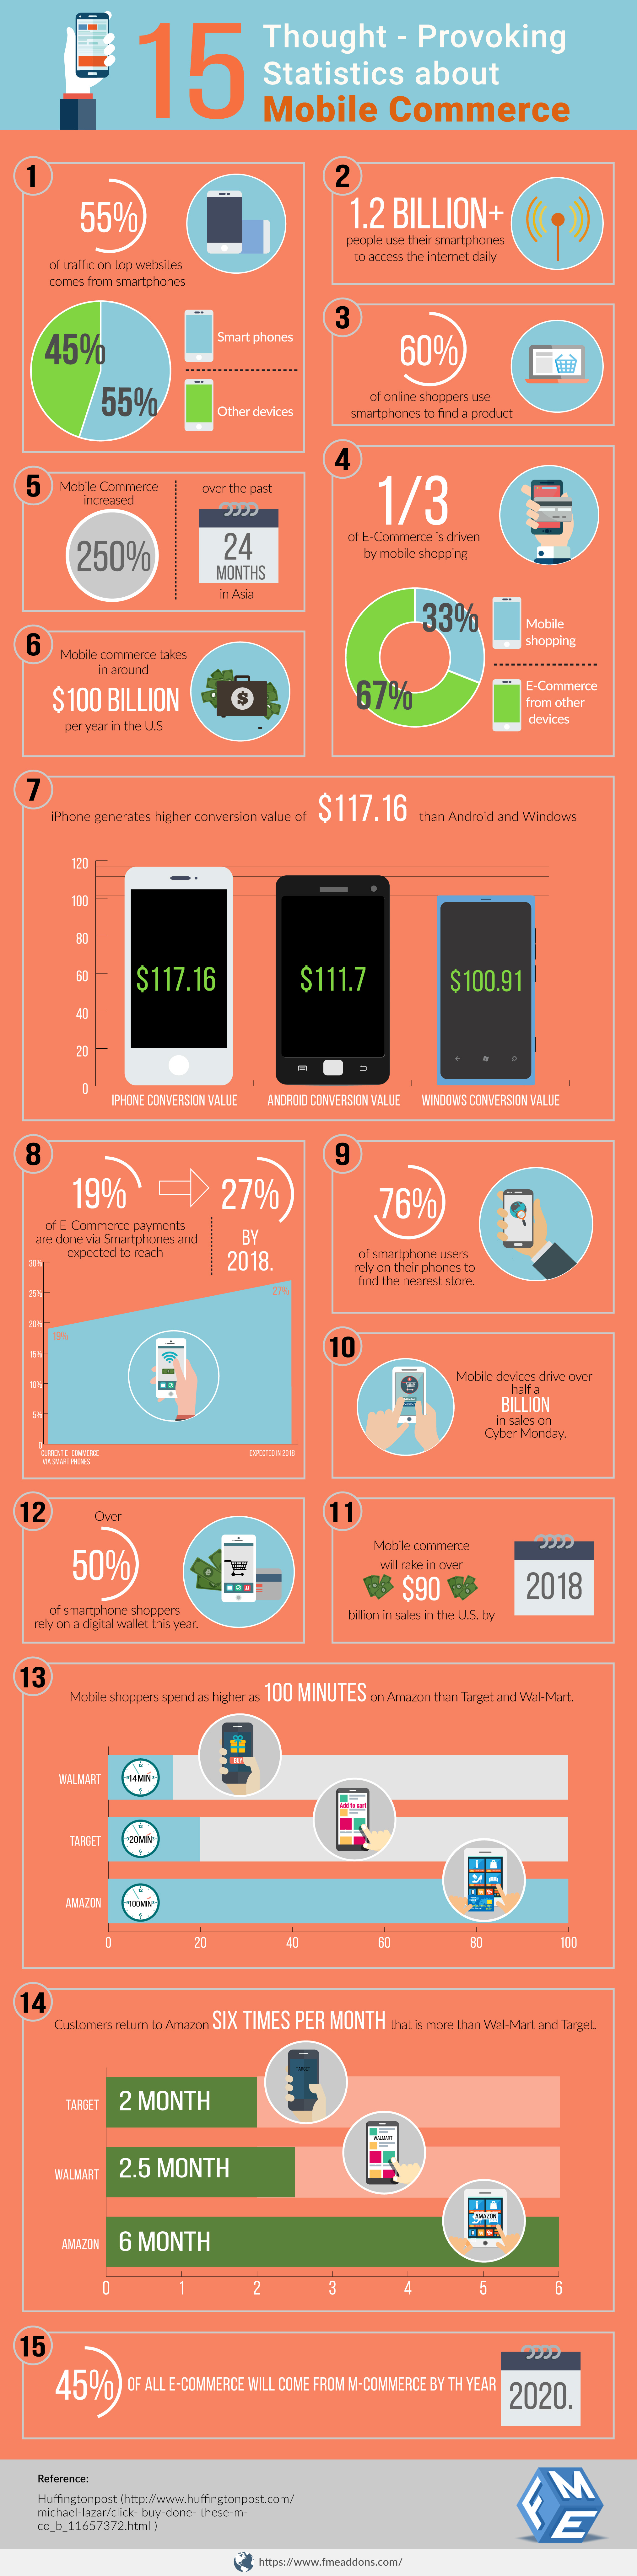 15 Thought-Provoking Statistics about Mobile Commerce